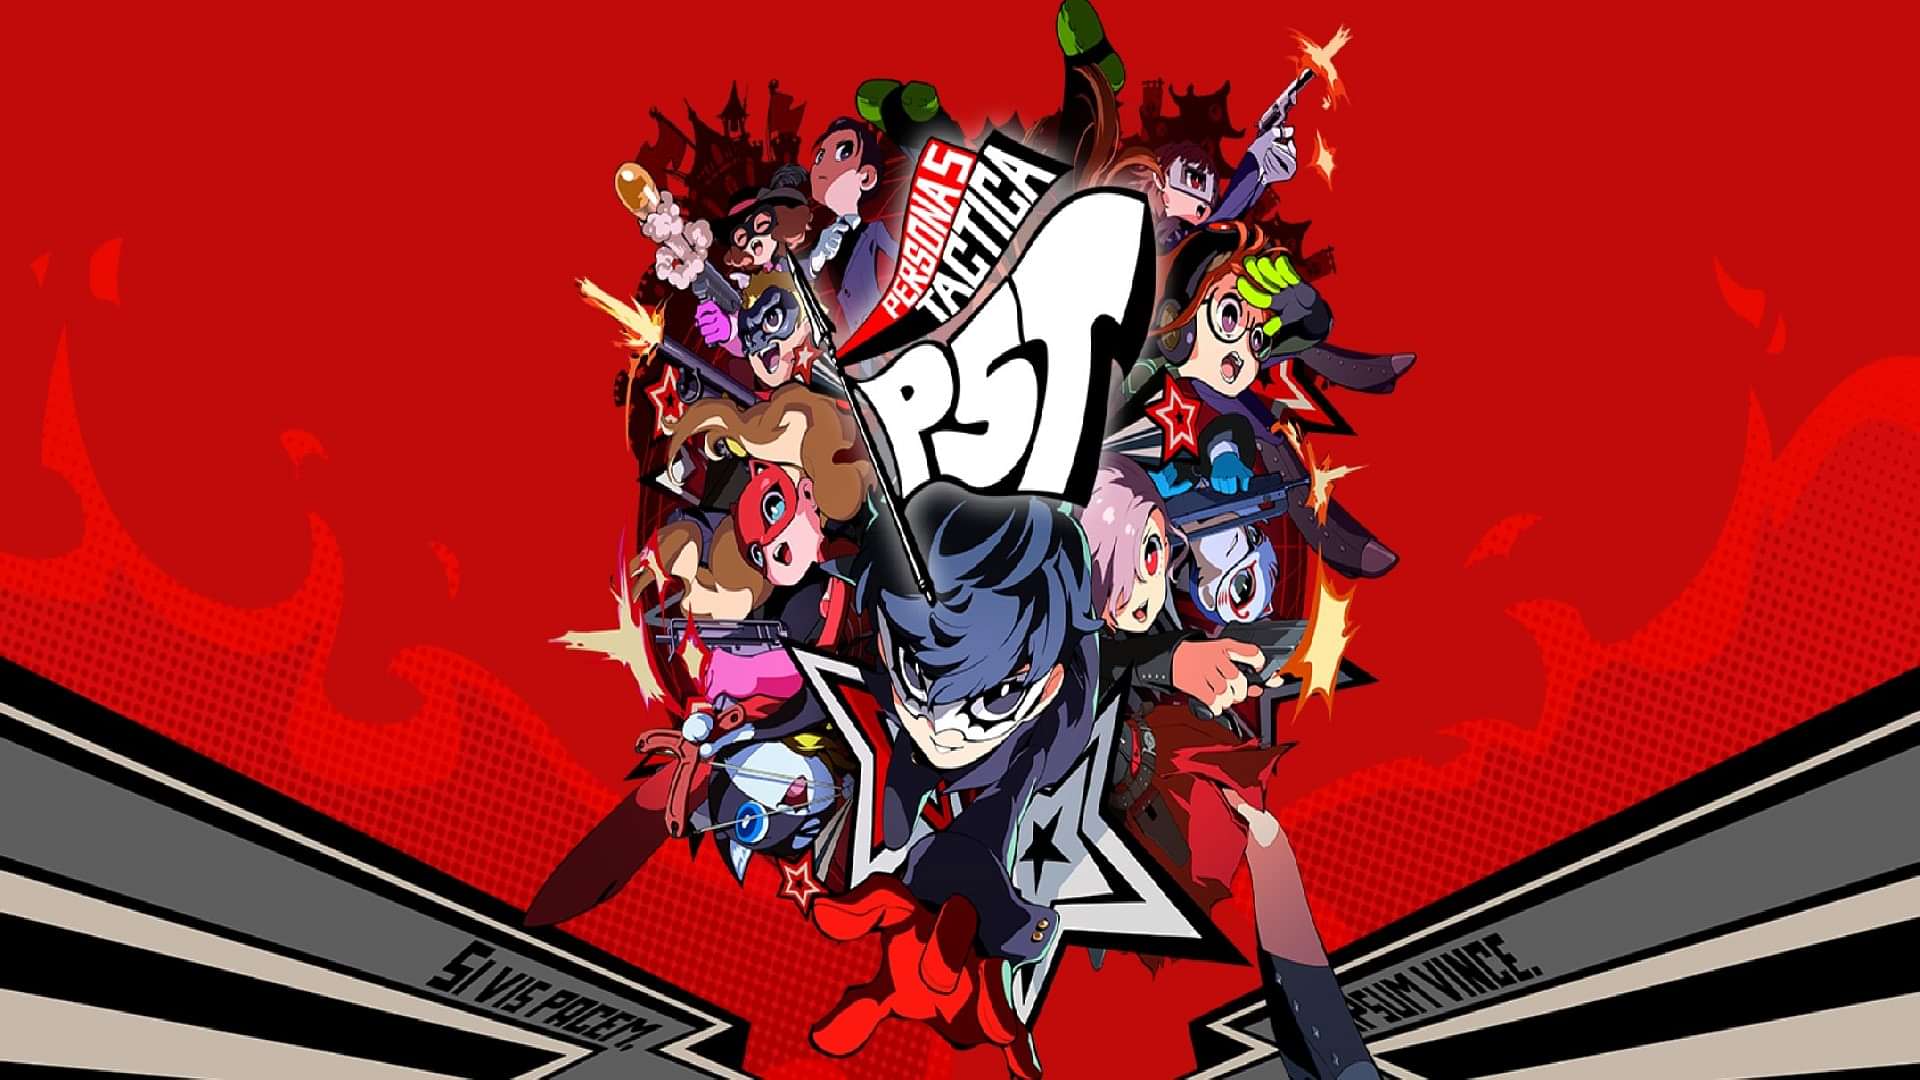 How To Build A Better Party In Persona 5 Tactica